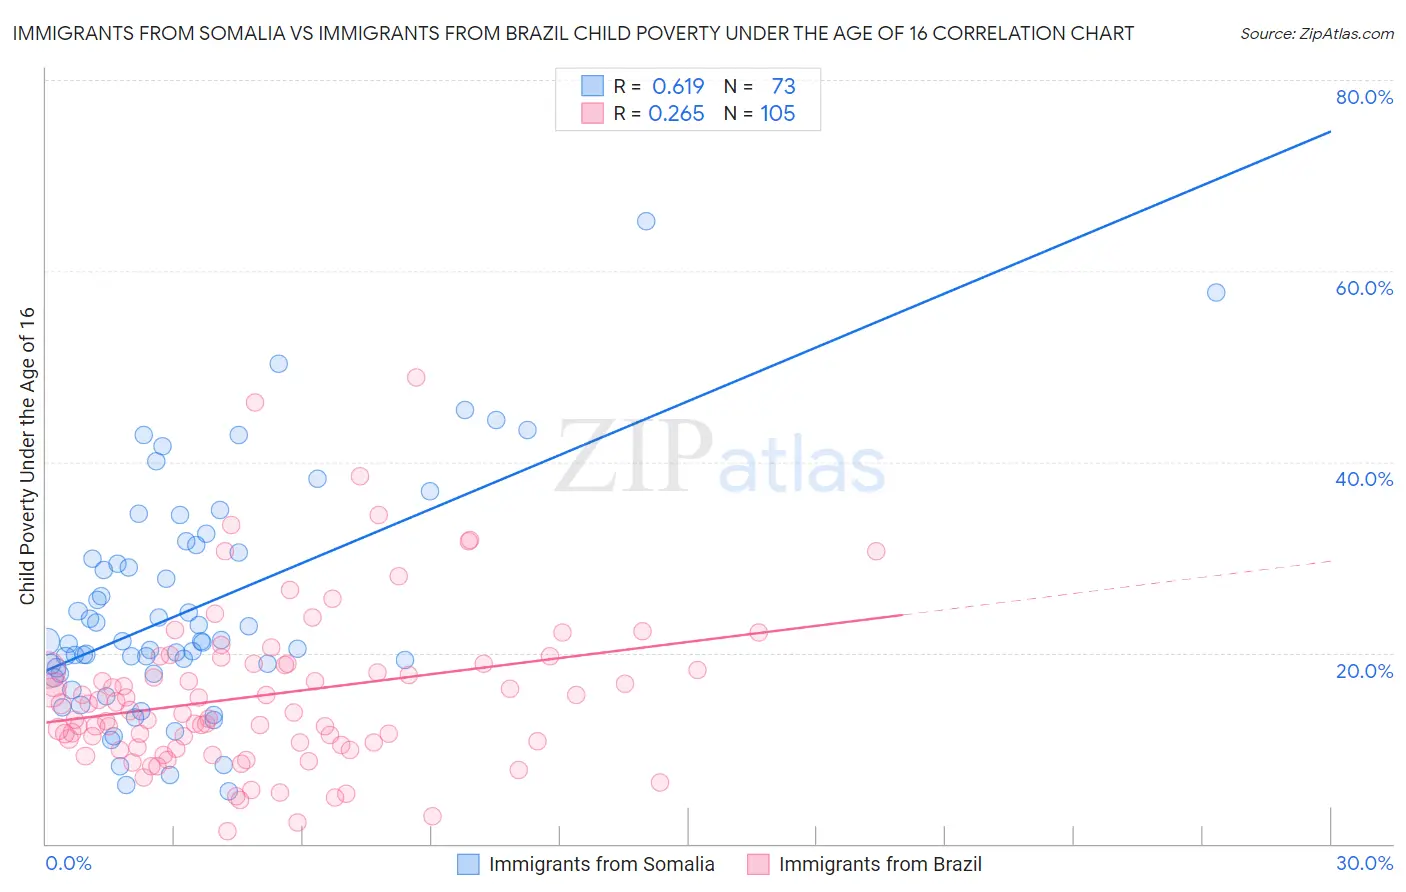 Immigrants from Somalia vs Immigrants from Brazil Child Poverty Under the Age of 16